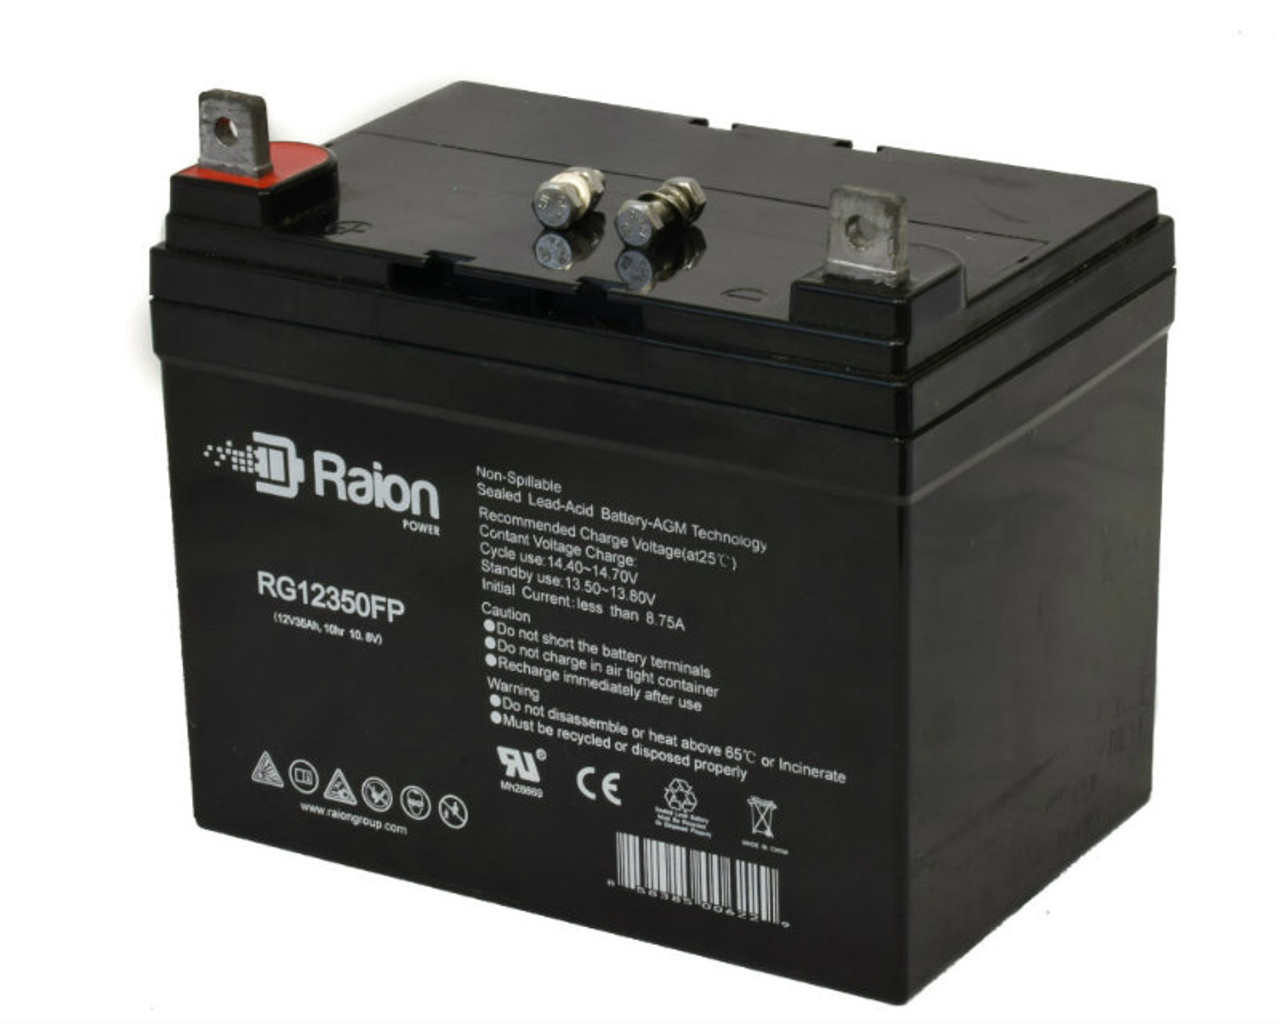 Raion Power Replacement 12V 35Ah RG12350FP Battery for Yard-Man Y834P